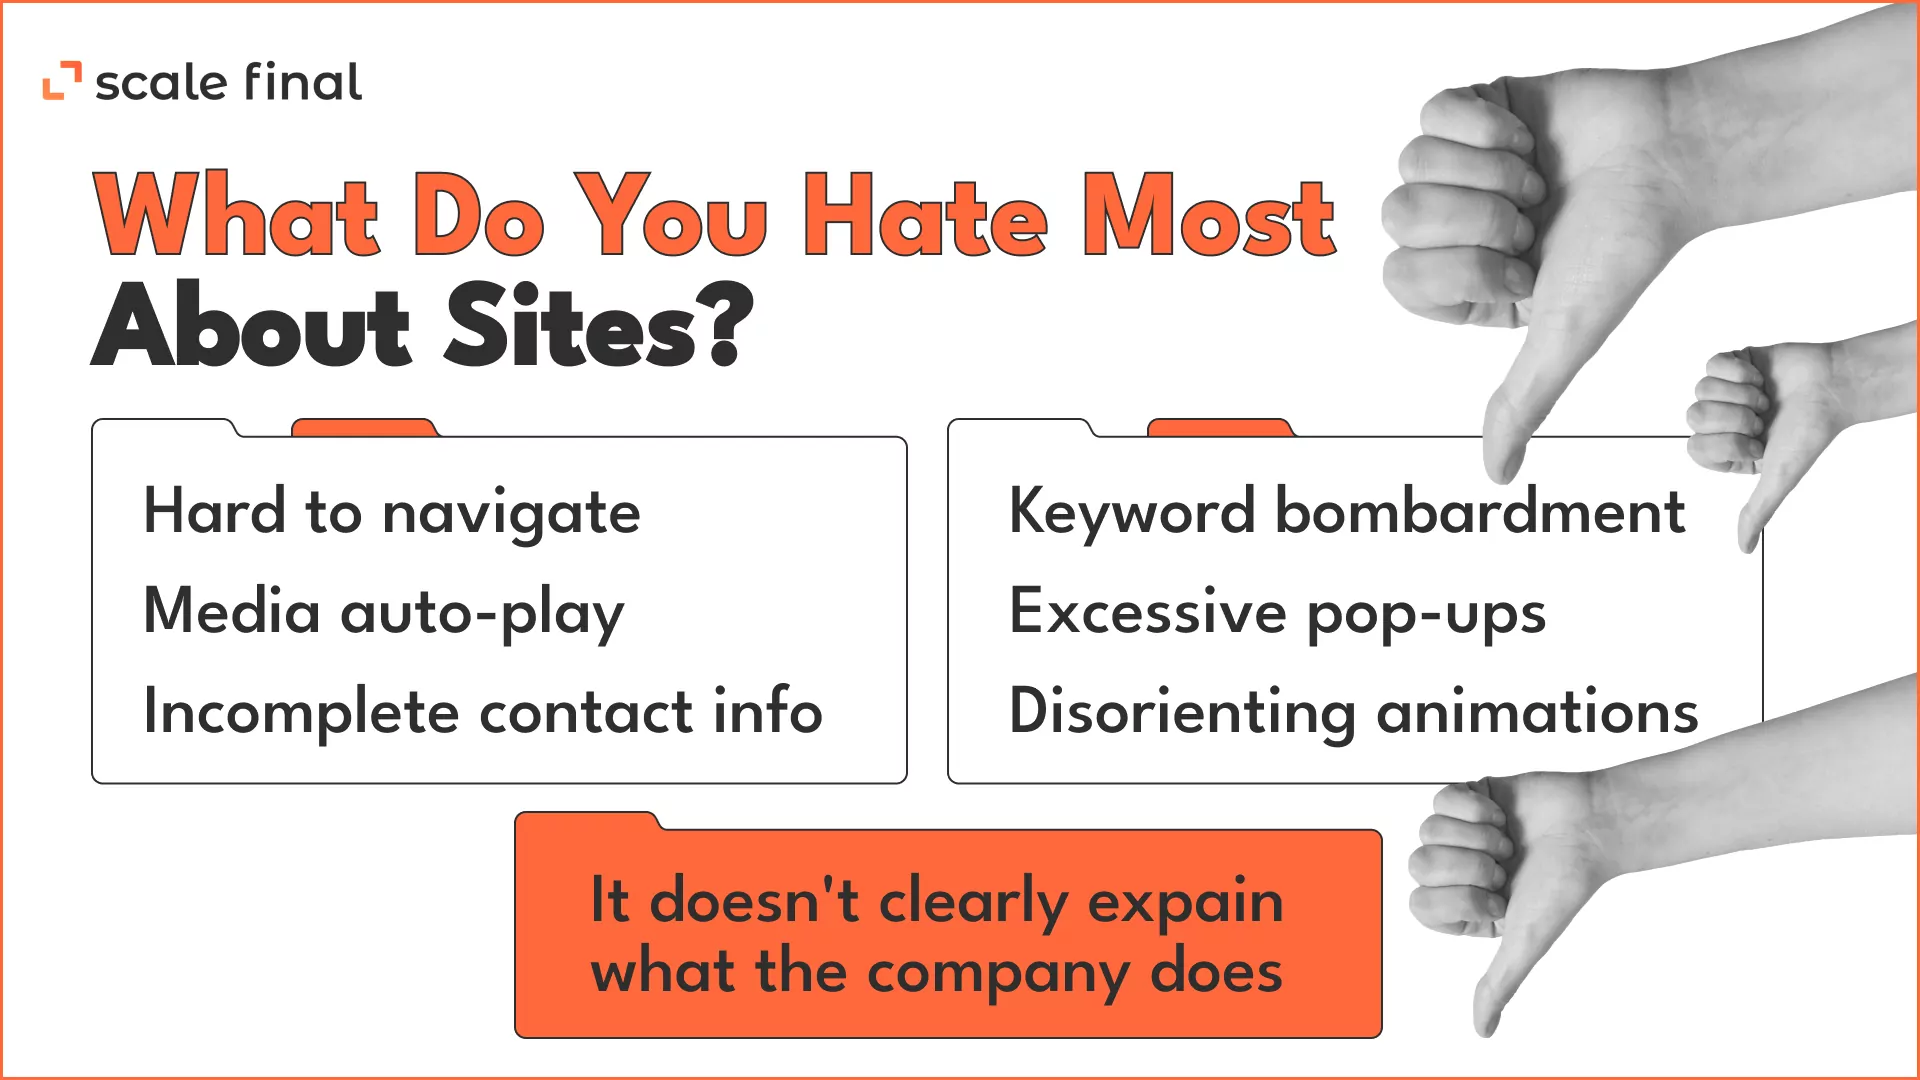 What do you hate most about sites? 